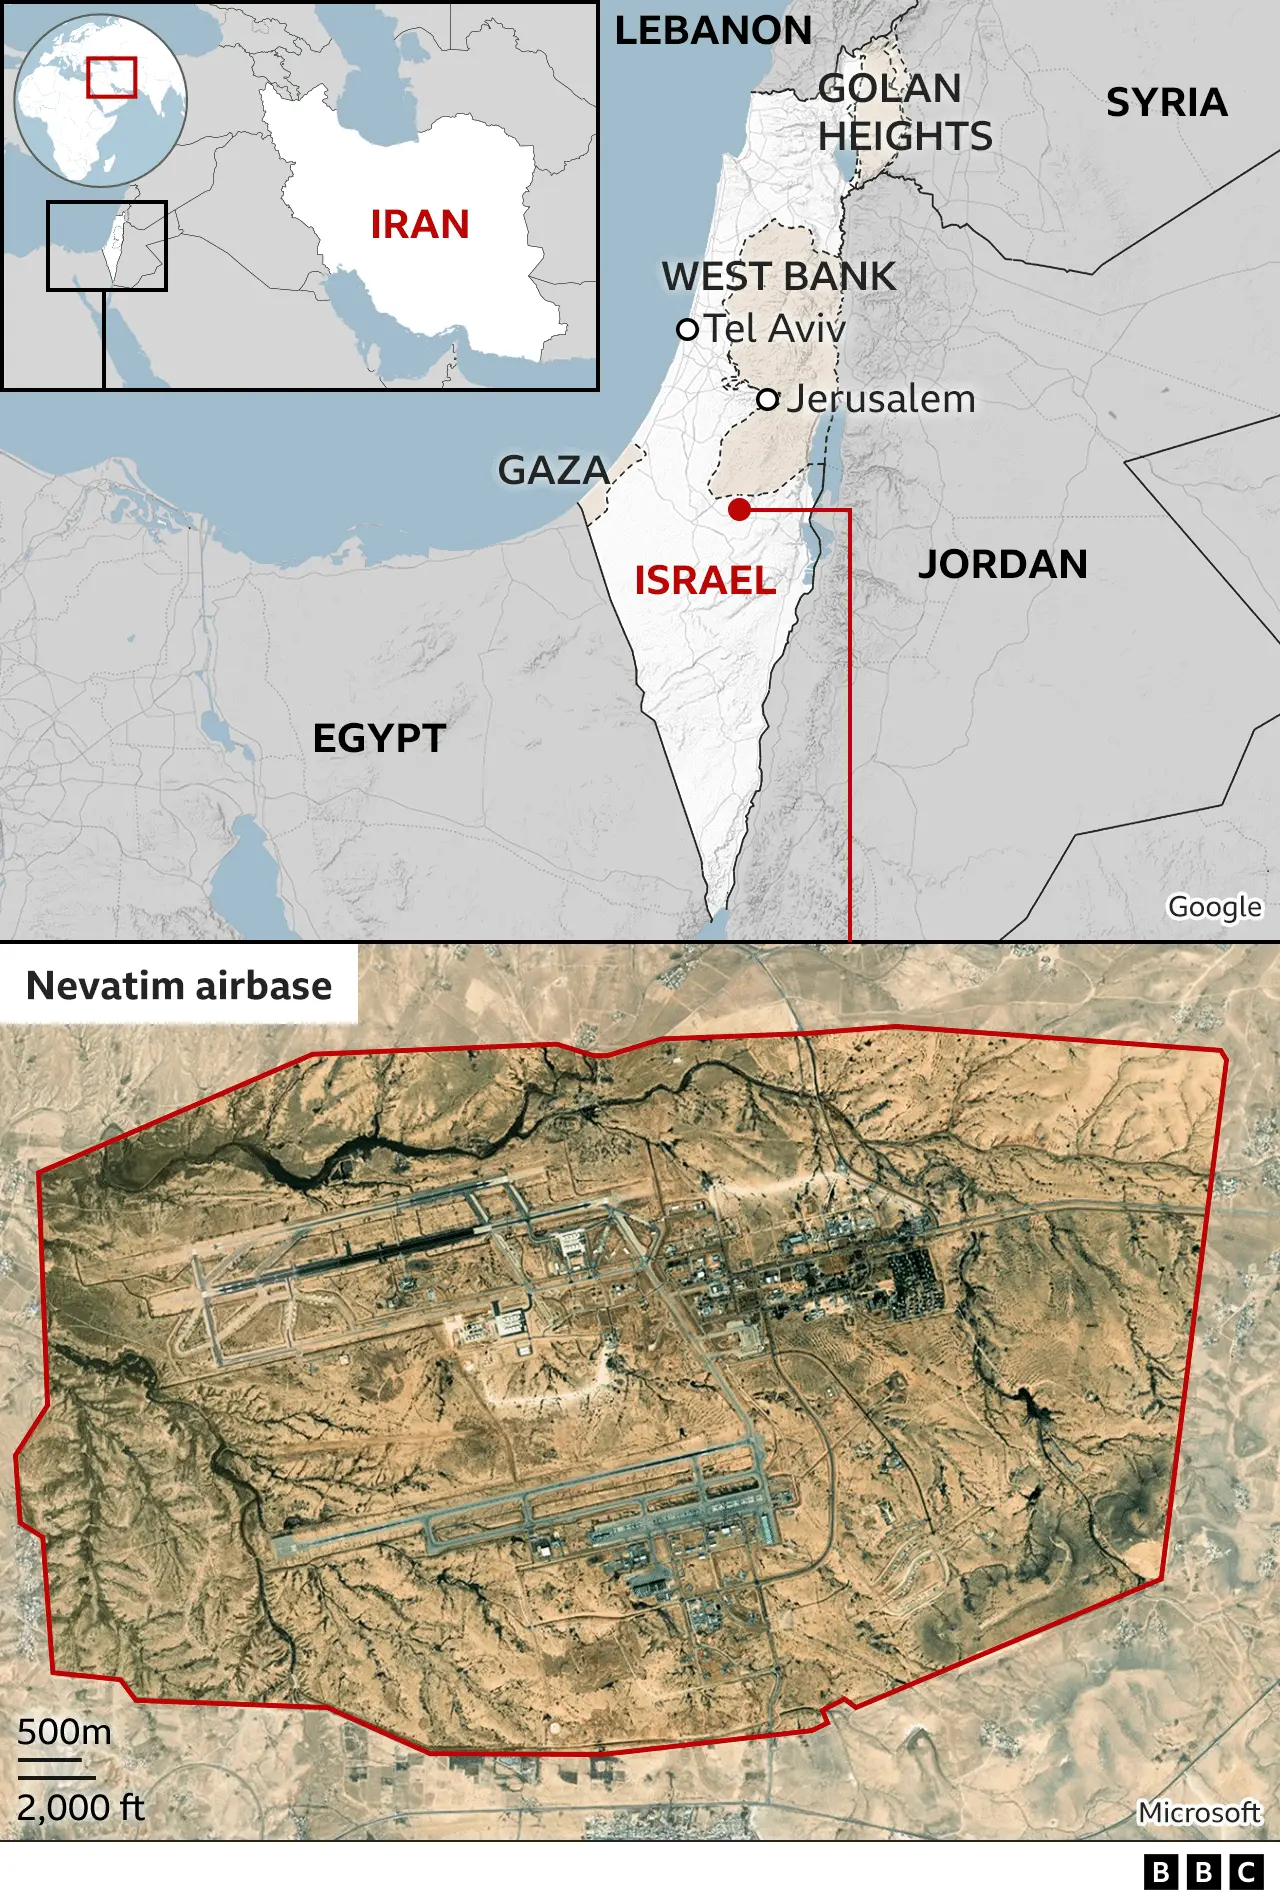 Map locating the Nevatim airbase in Israel and showing Gaza, the West Bank and the Golan Heights.